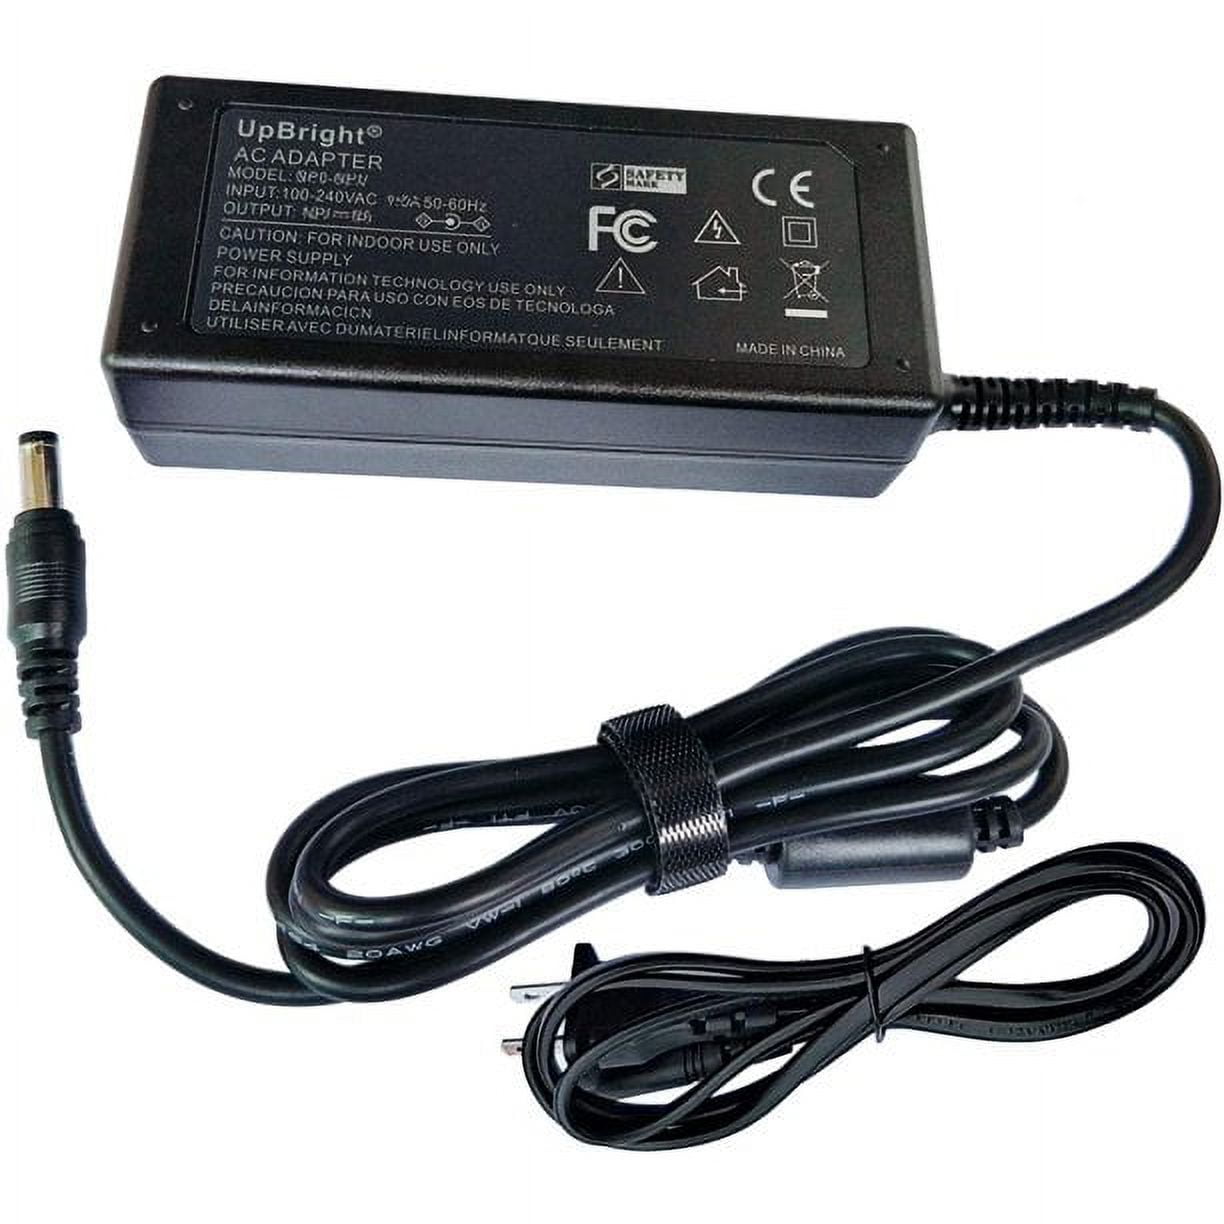 Power Cord AC Adapter for Cricut Air Explore & Explore 2 by Pure Power  Adapters 